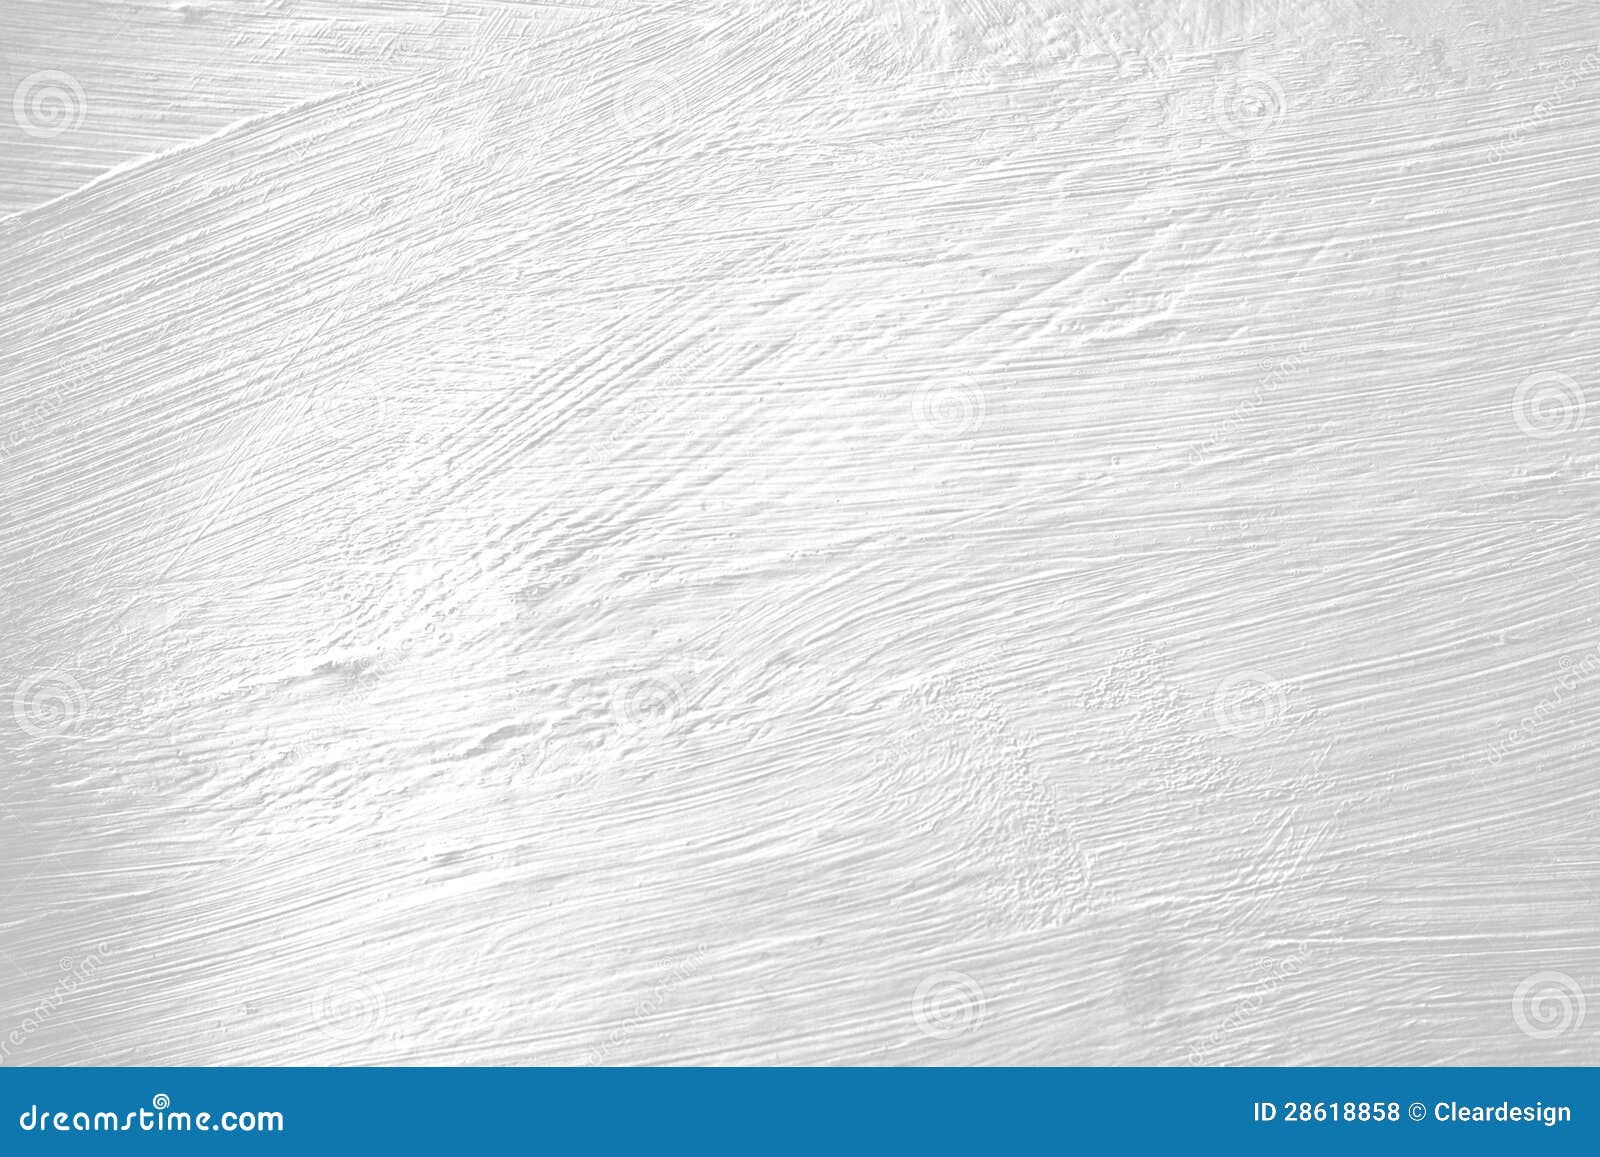 White Painted Wall with Brush Marks Stock Photo - Image of interior